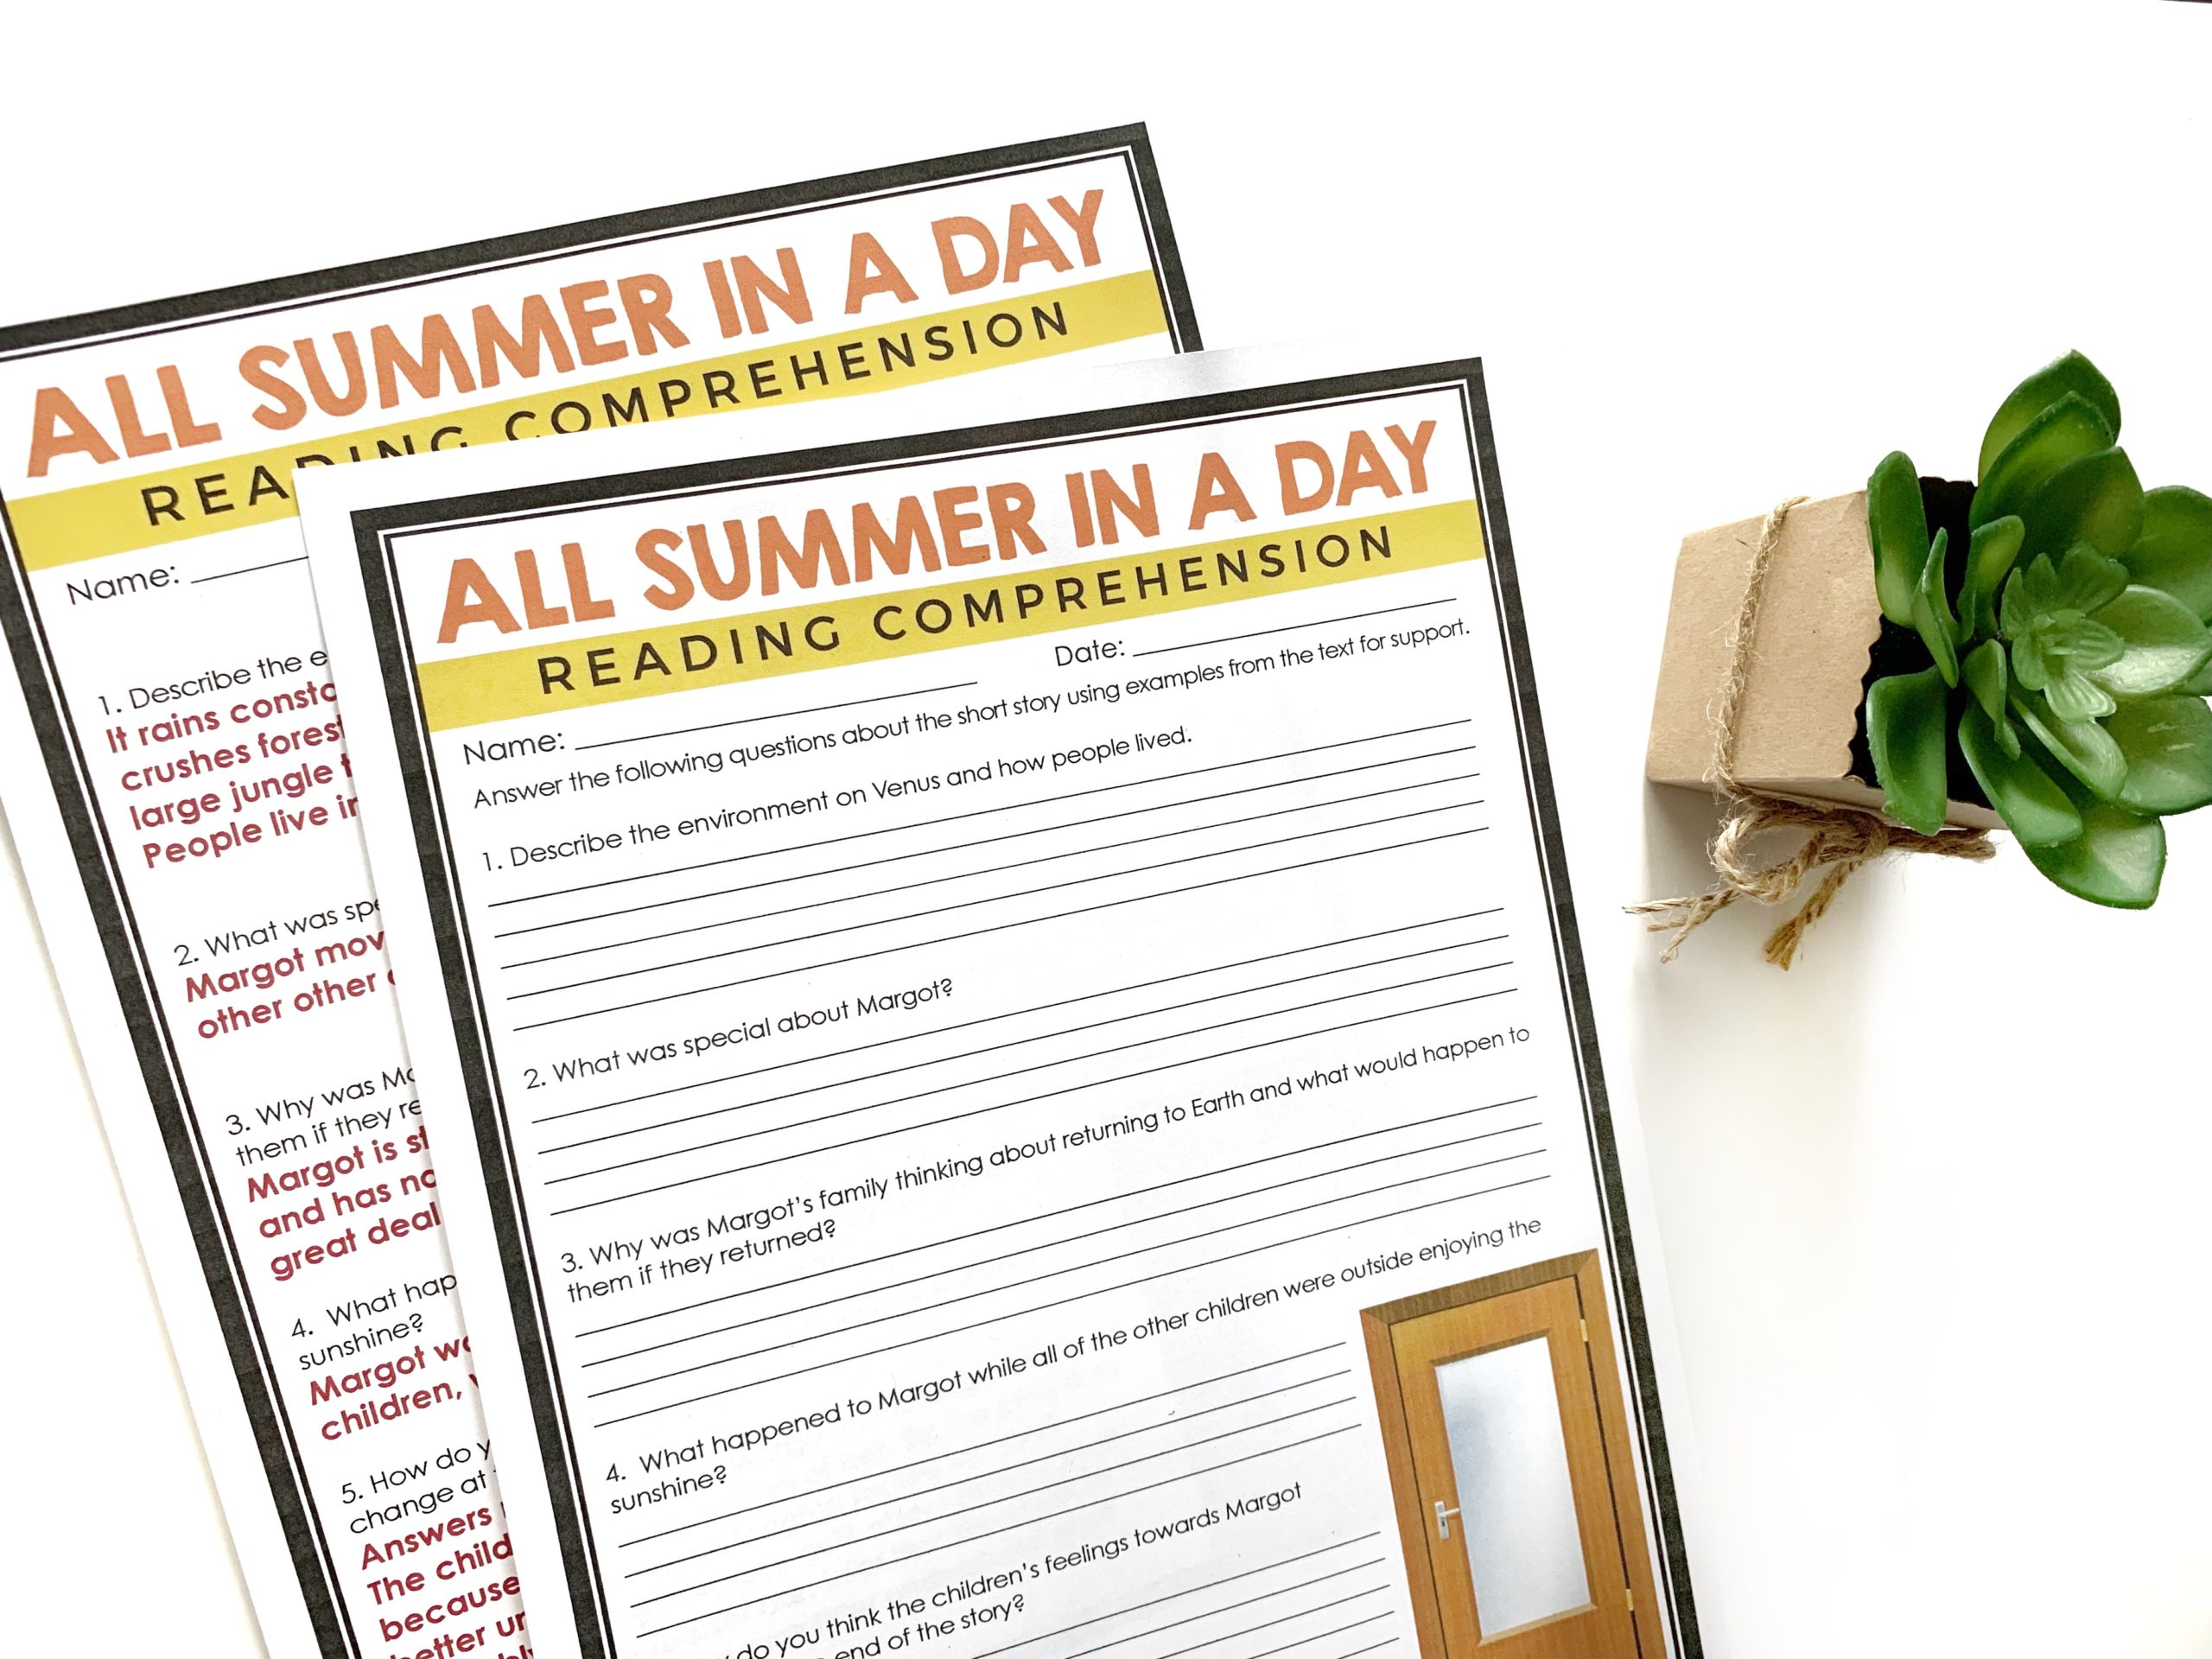 All Summer in a Day Reading Comprehension Quiz